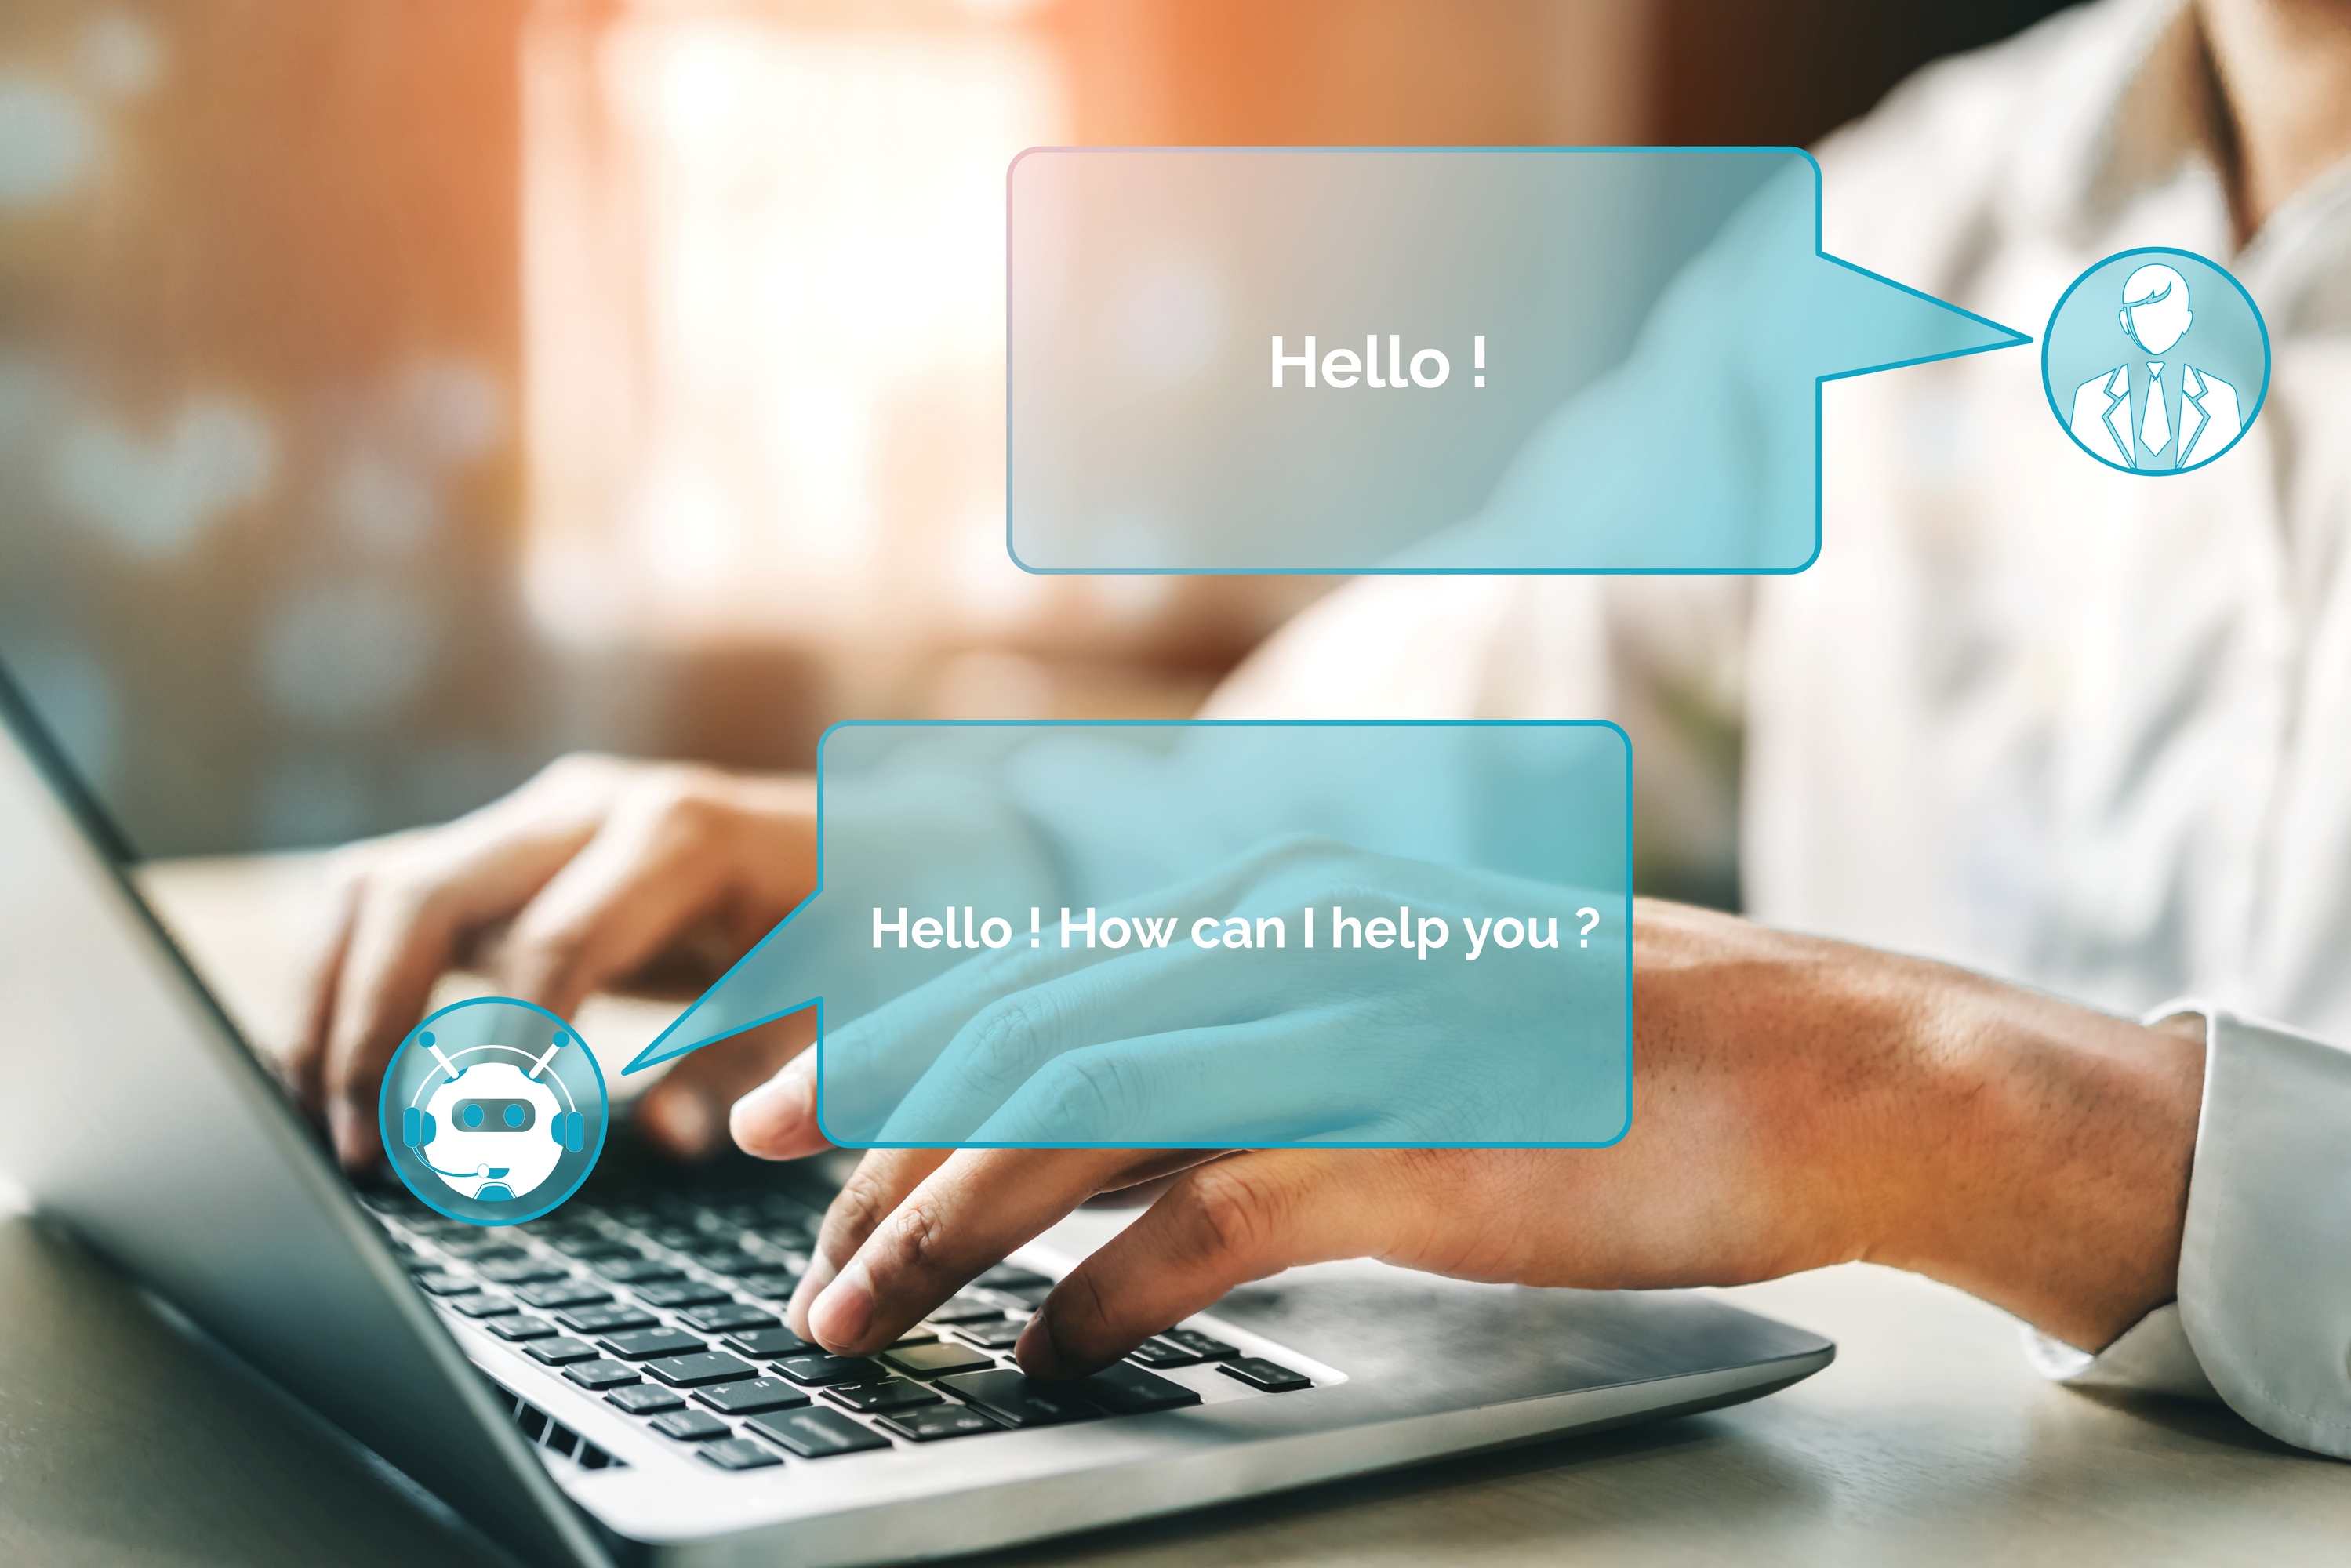 Customer Self-Service with Chatbot